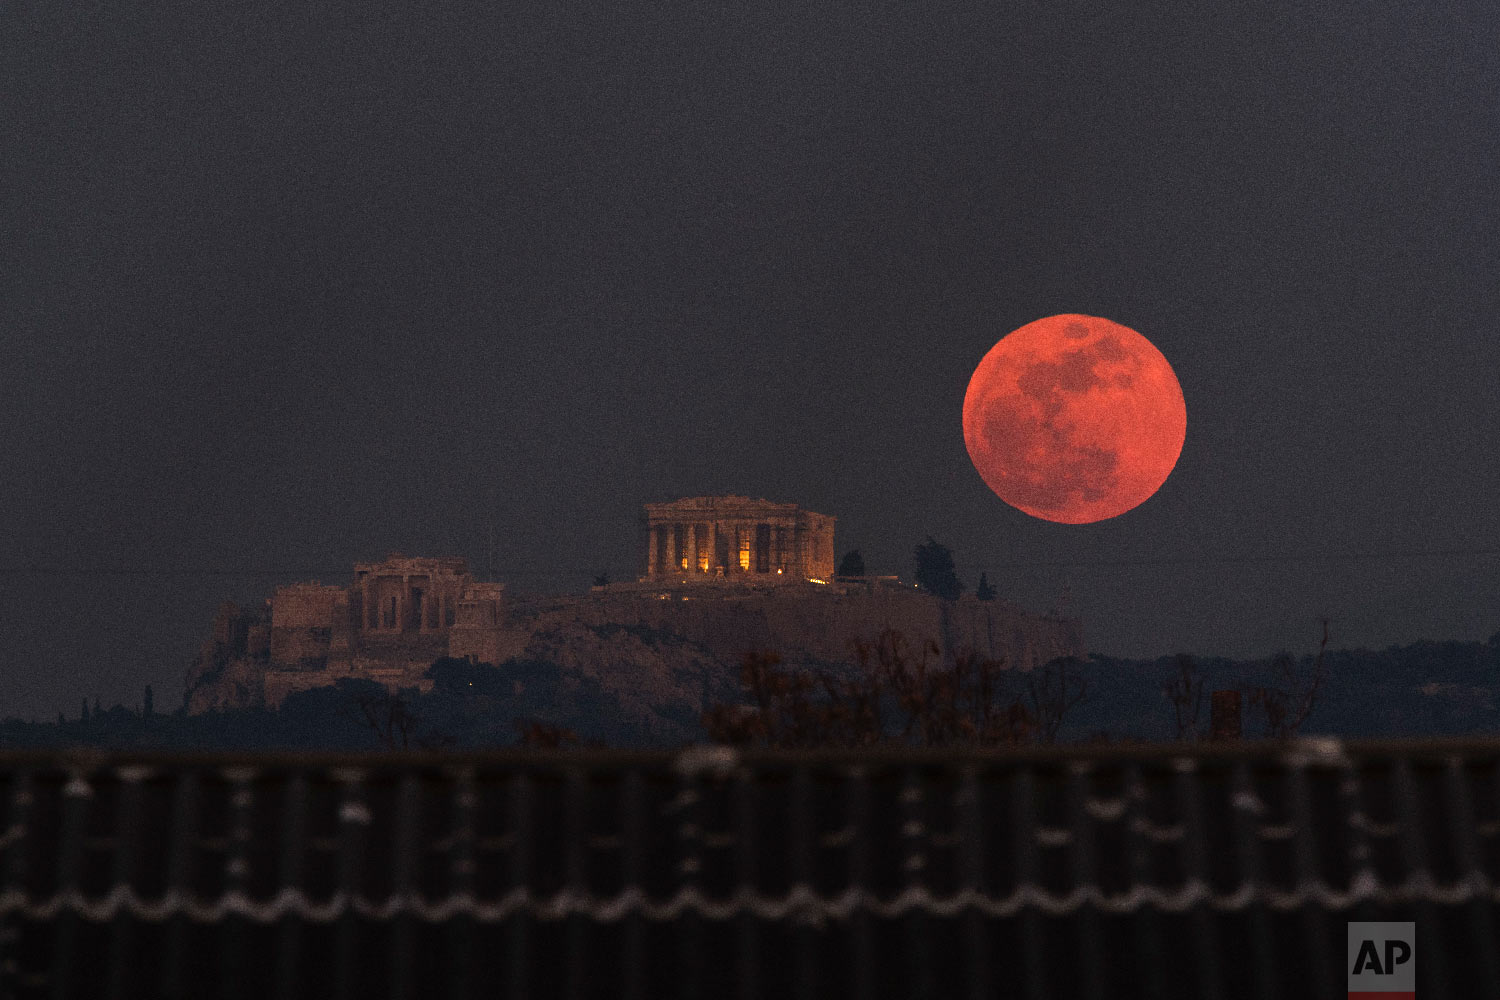  A super blue blood moon rises behind the 2,500-year-old Parthenon temple on the Acropolis of Athens, Greece on an. 31, 2018. (AP Photo/Petros Giannakouris) 